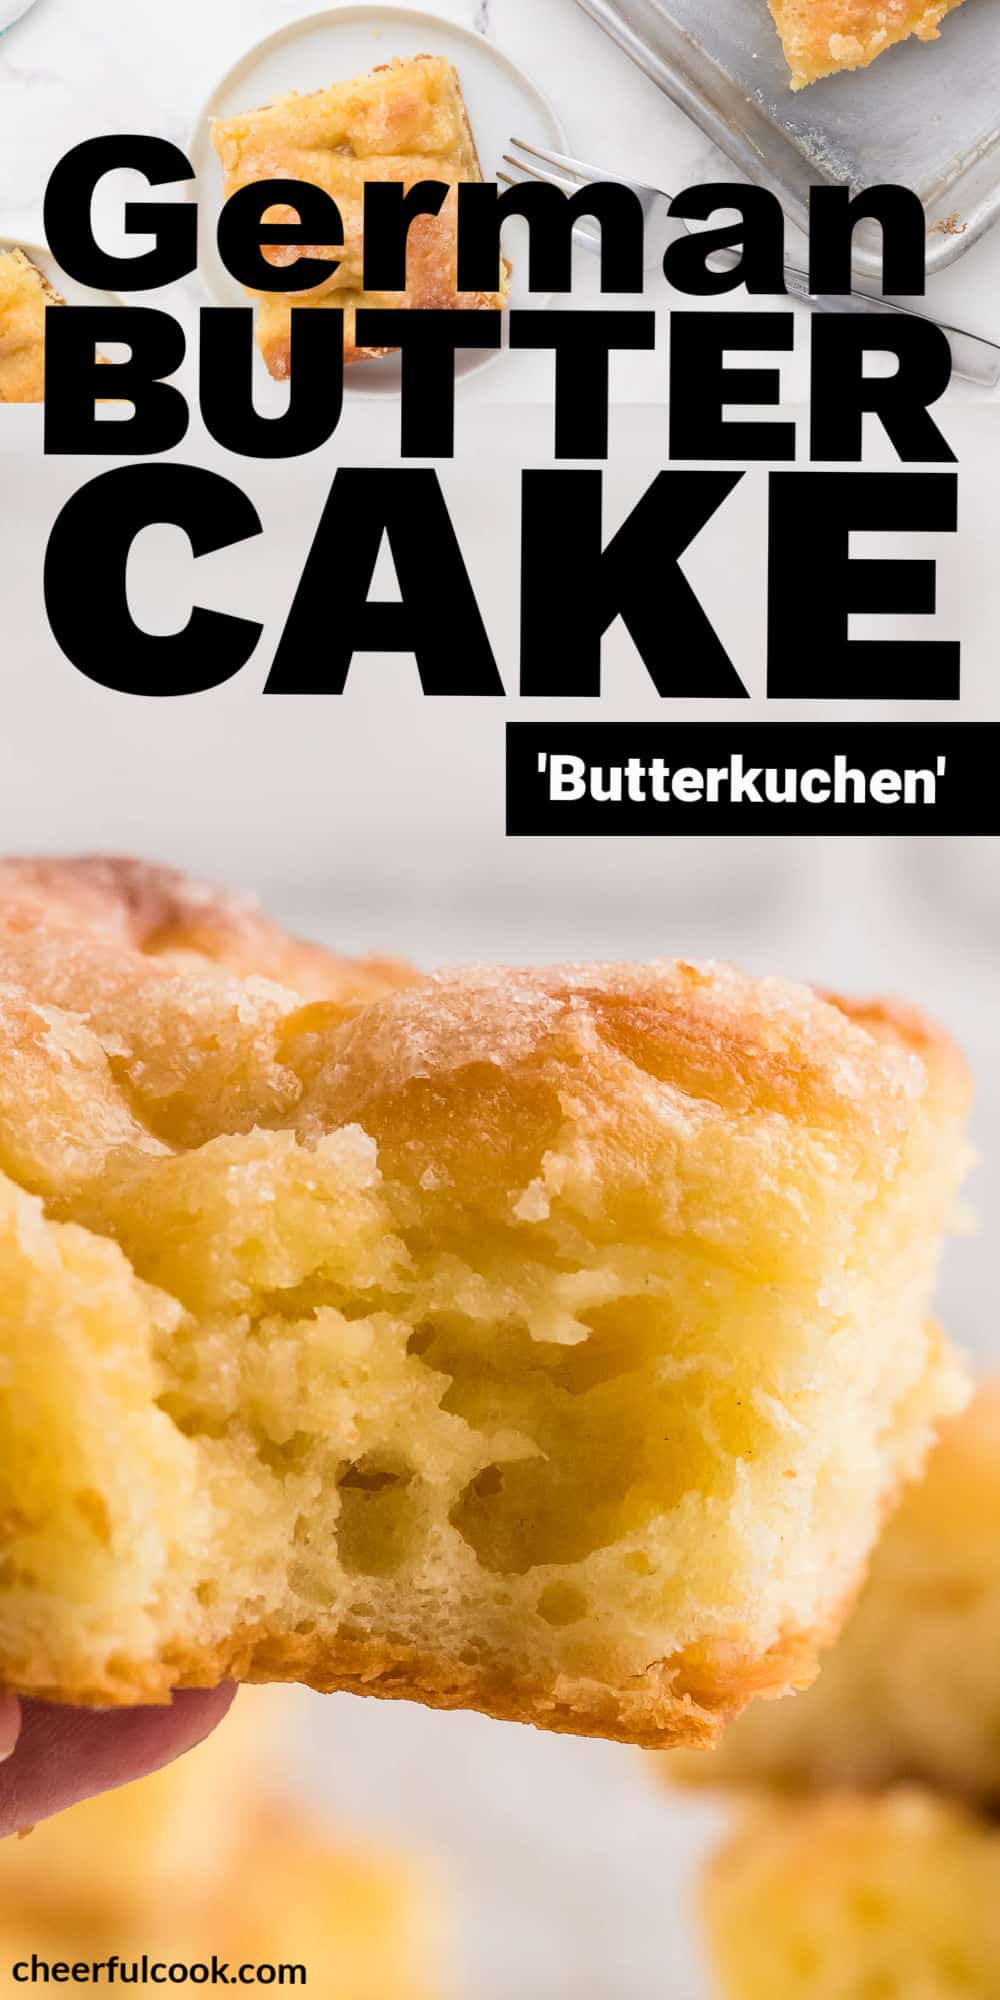 German Butter Cake is made with a rich blend of milk, sugar, yeast, eggs, and flour. And of course plenty of butter! The result is a melt-in-your-mouth delicious light and airy cake, that's gooey and sweet. Butterkuchen Dessert | German Butter Cake | German Desserts #cheerfulcook #butterkuchen #buttercake #recipe #baking #German 
 via @cheerfulcook